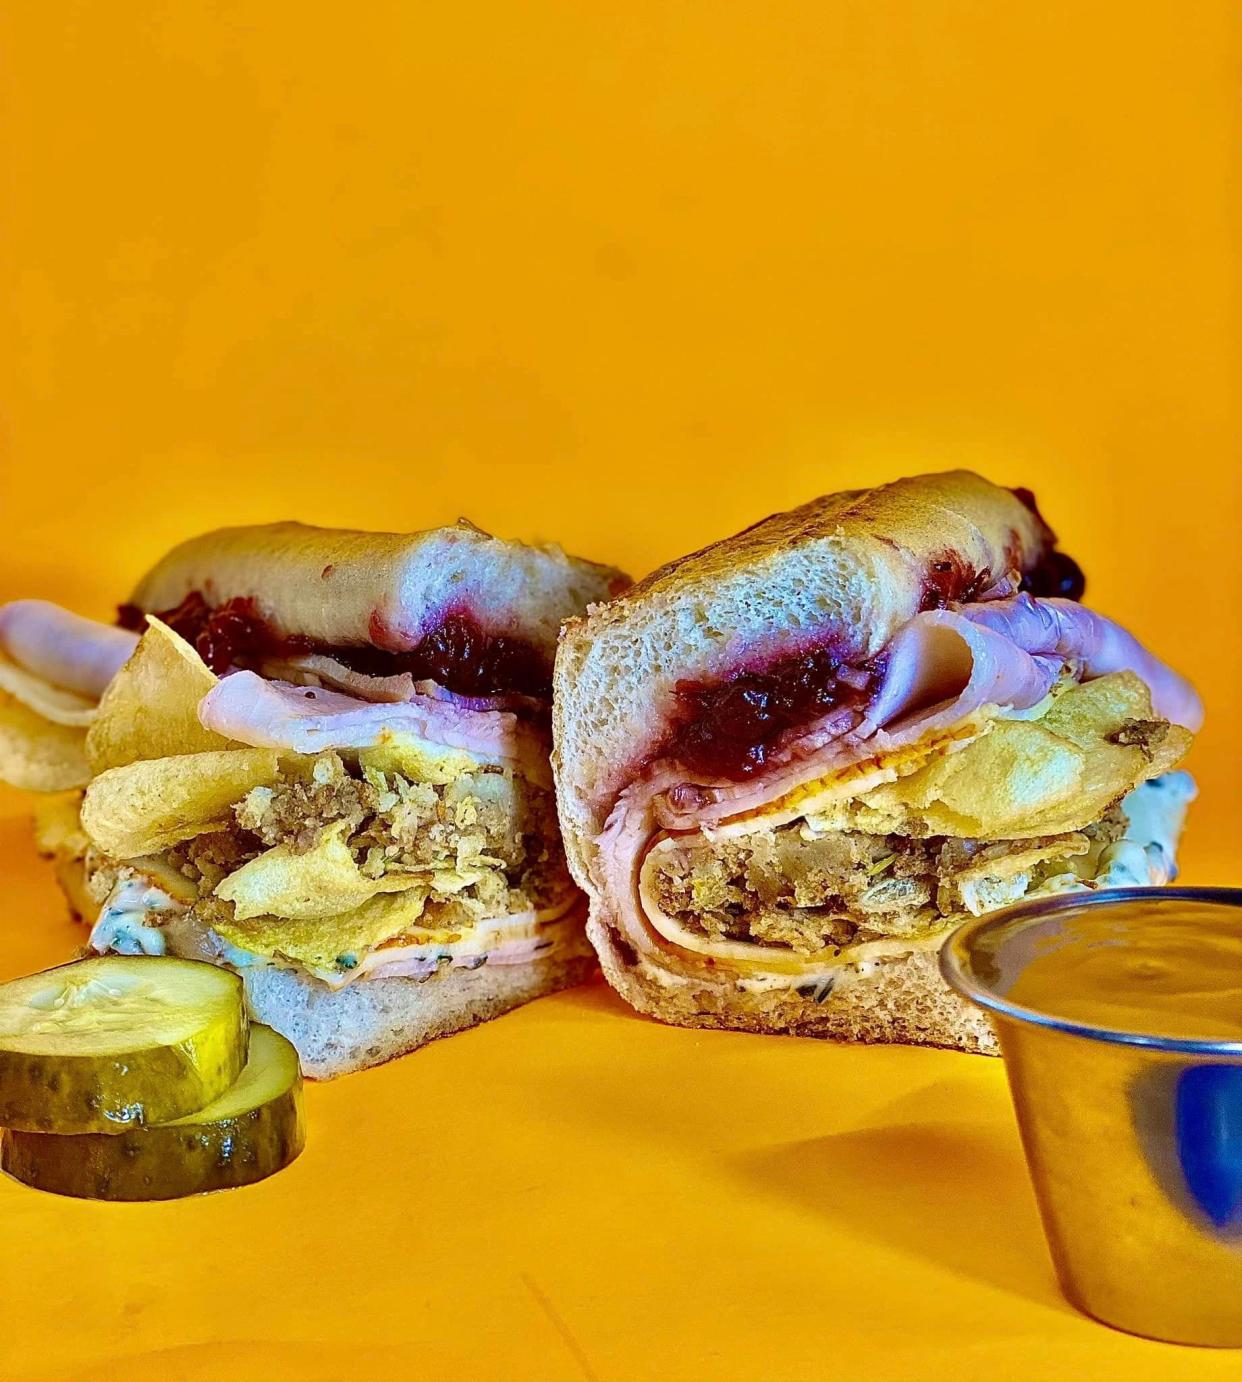 The Leftovers Sandwich is a November special at CheeseSmith, 624 S 17th St., Wilmington, N.C.